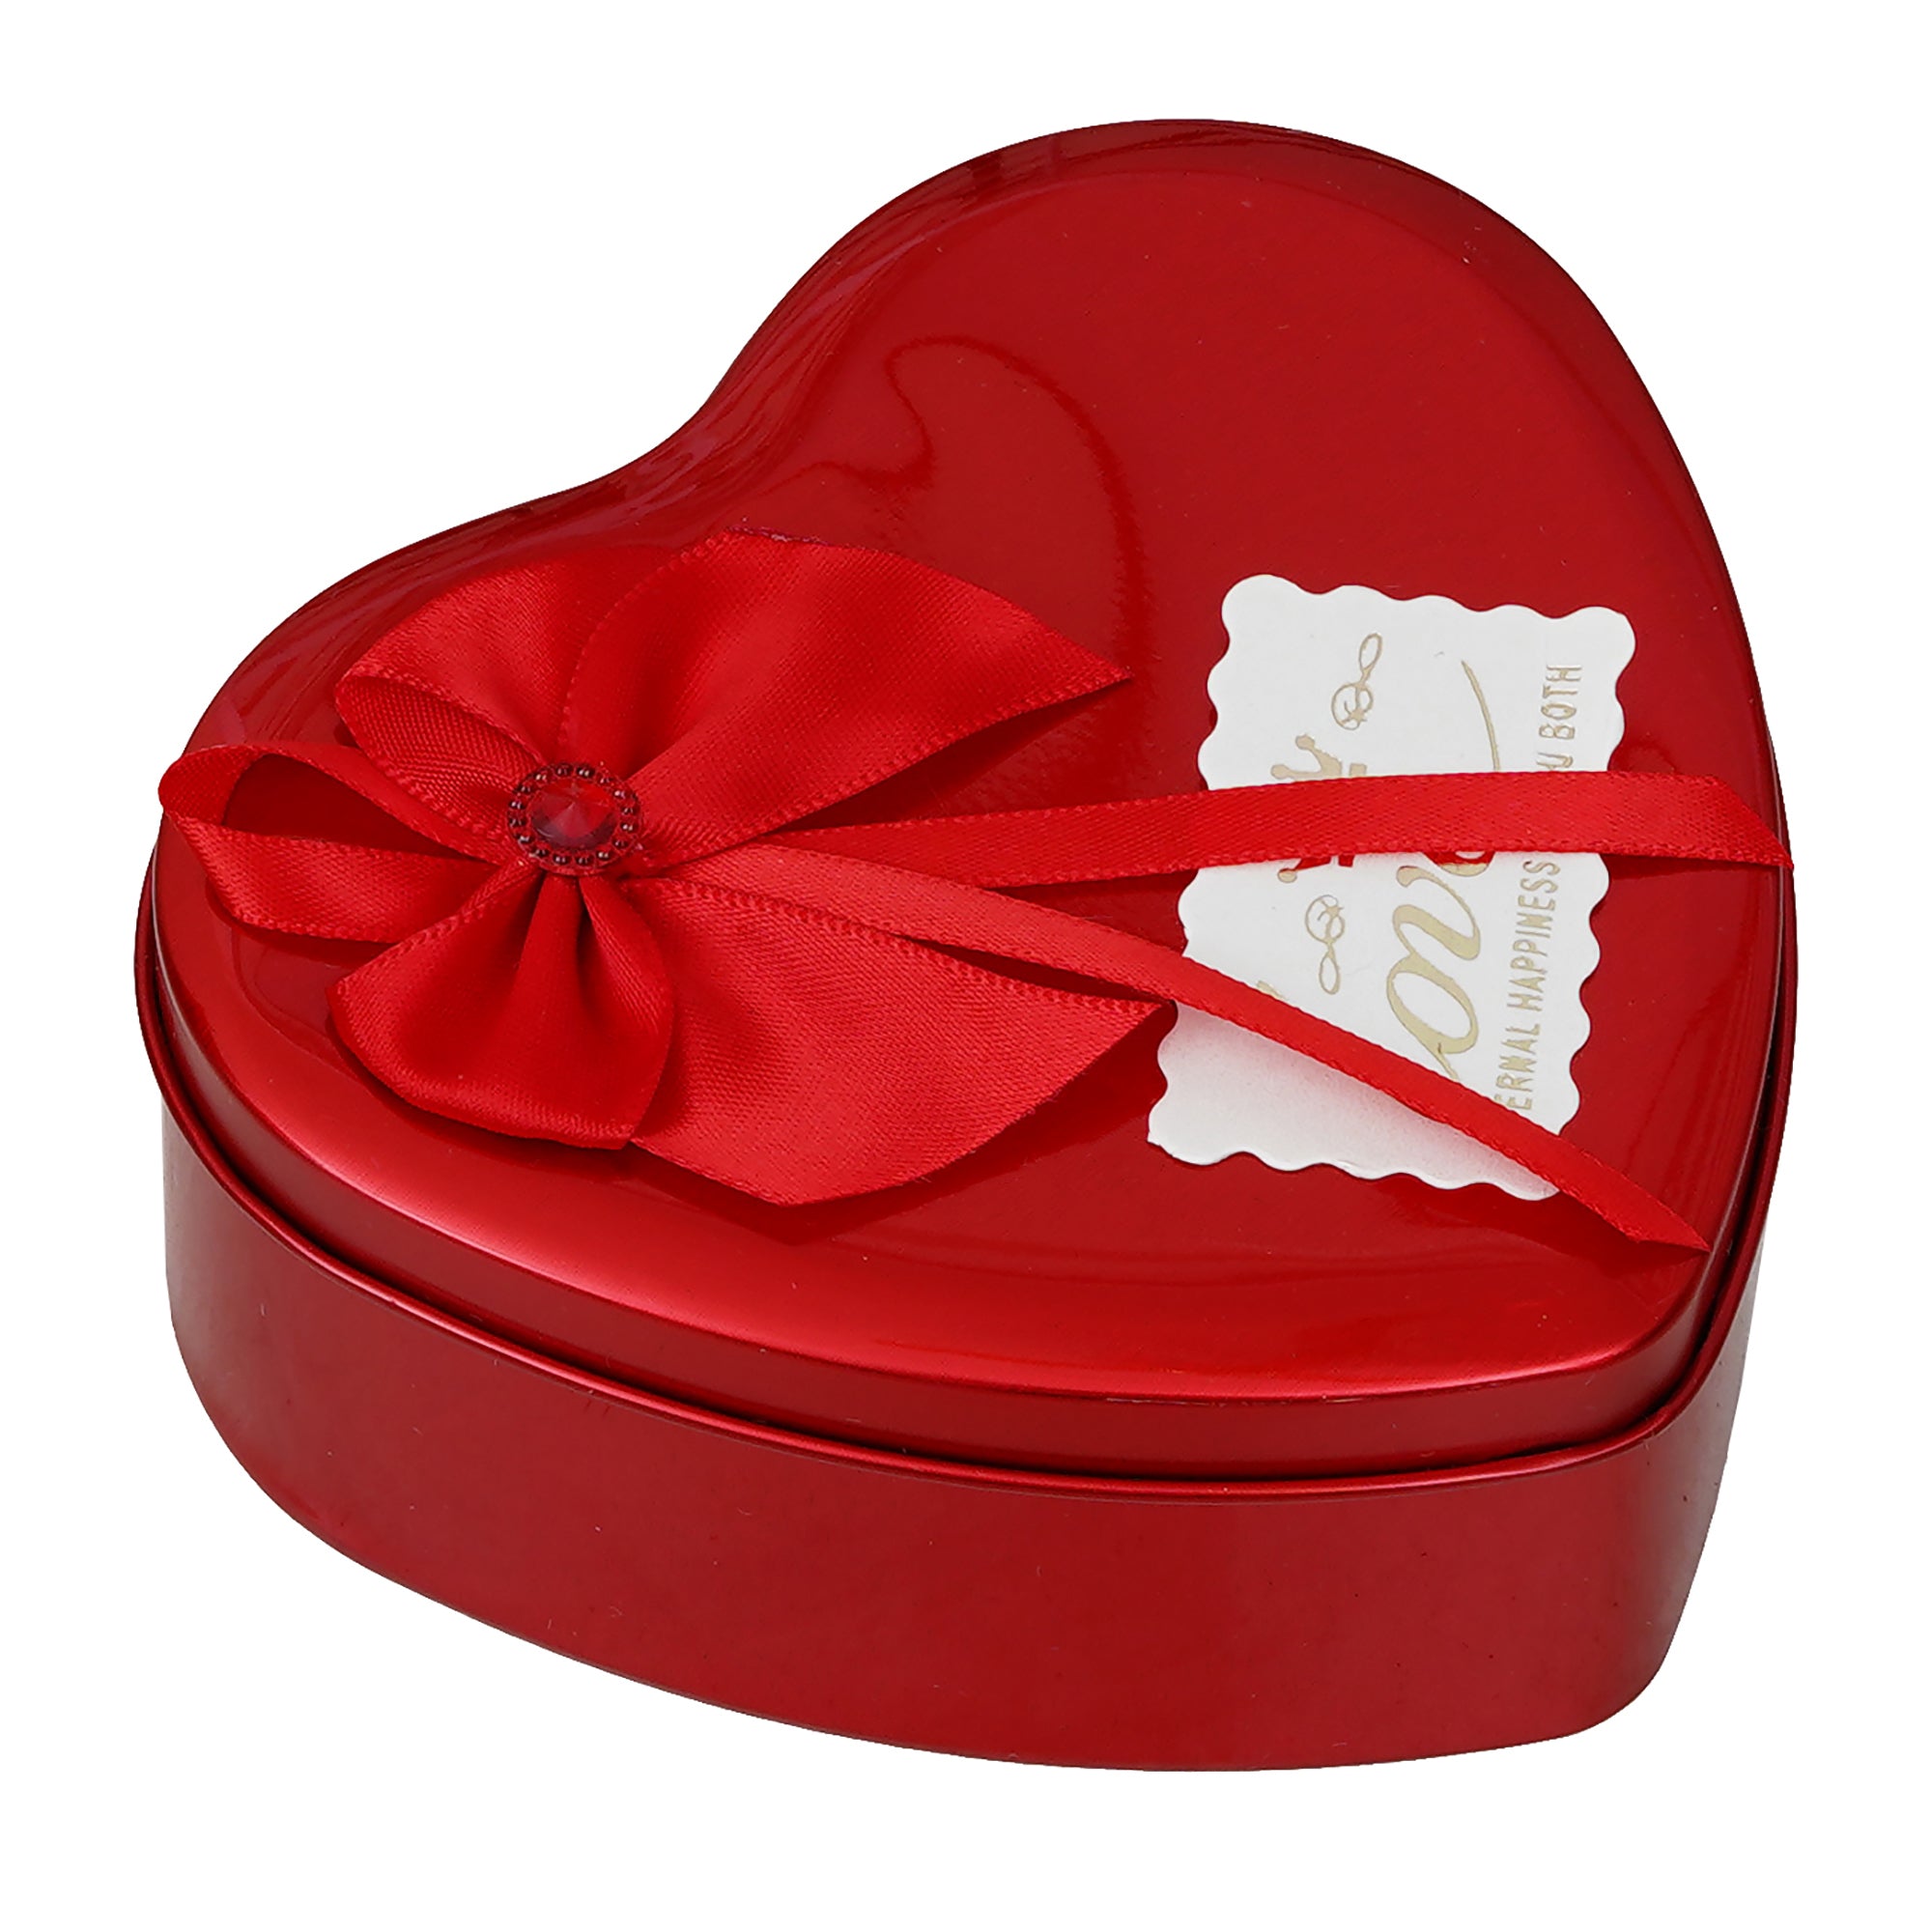 Red Heart Shaped Gift Box with 1 Golden Rose, 3 Red Roses, 2 Teddy Bear and a Card 5